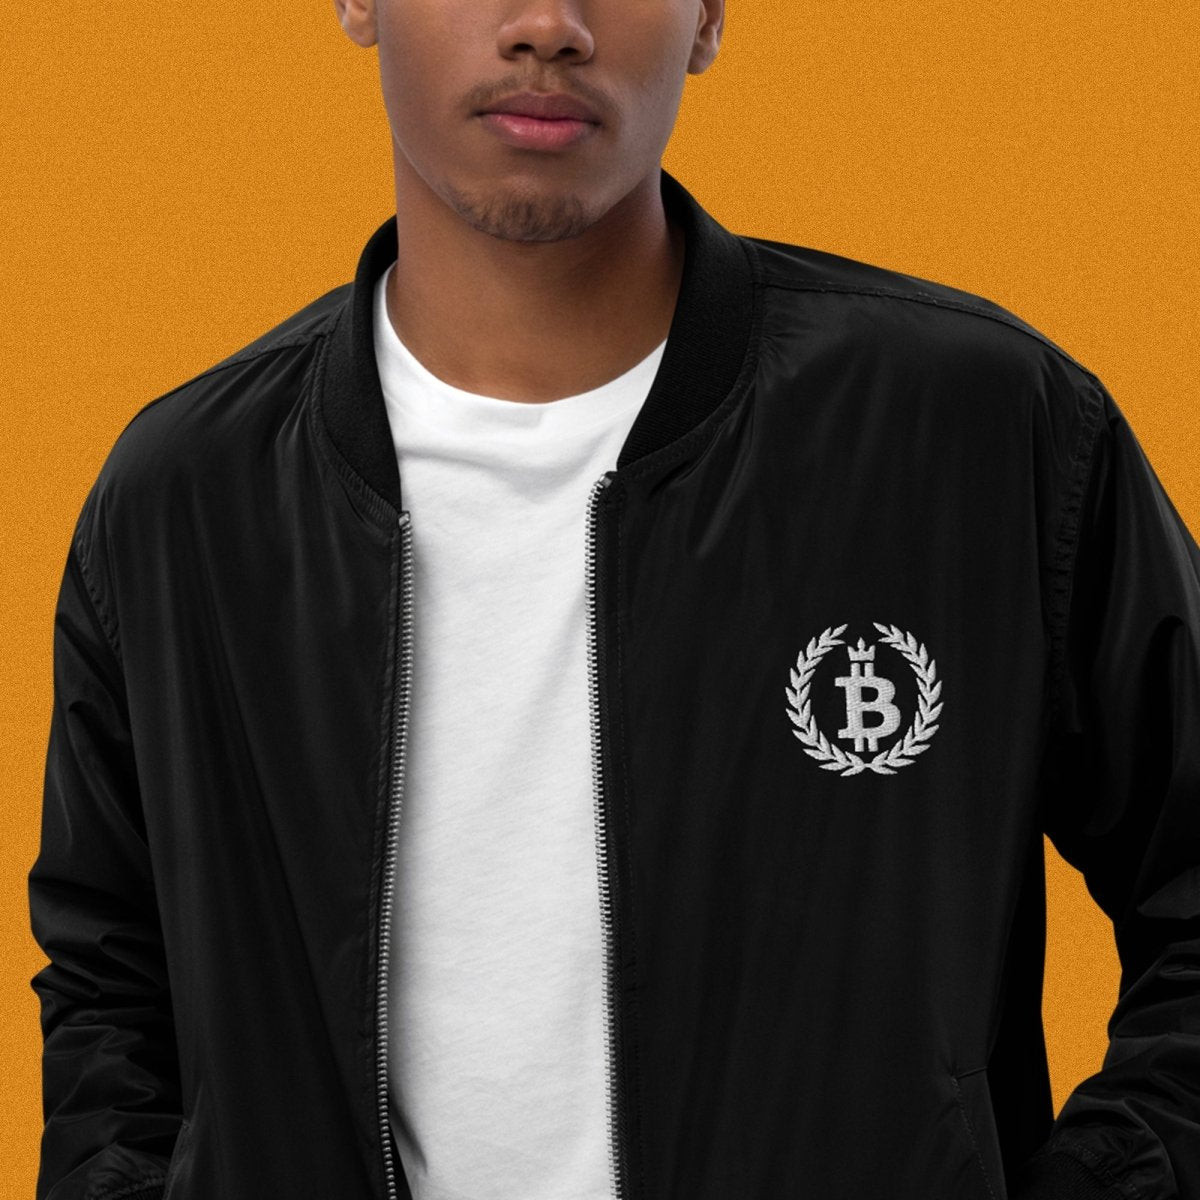 Bitcoin Clothing - Bitcoin Dominance Bomber Jacket worn by male model (front view).